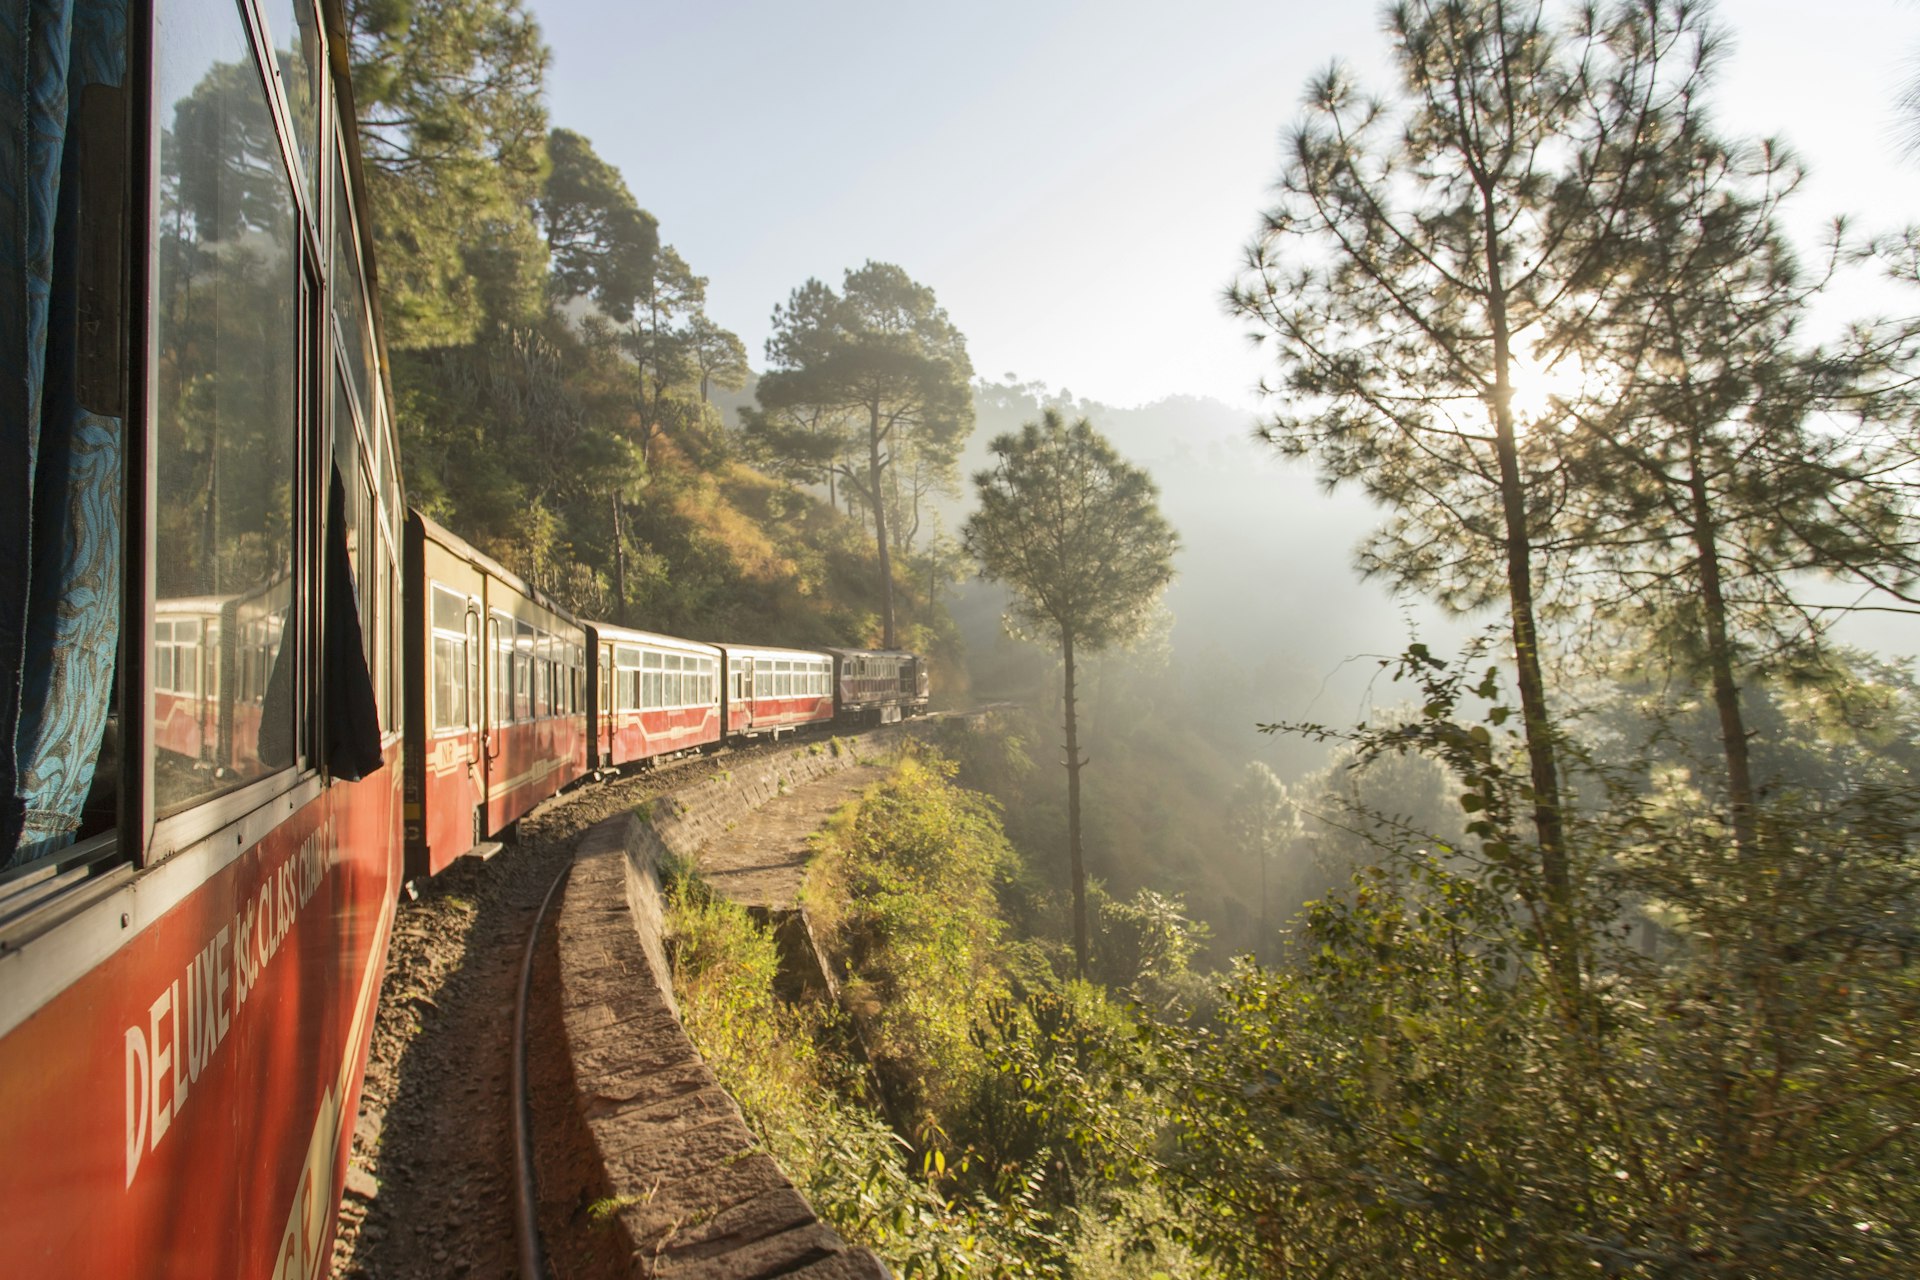 Shivalik Deluxe Express from Kalka to Shimla in the dawn light passing trees